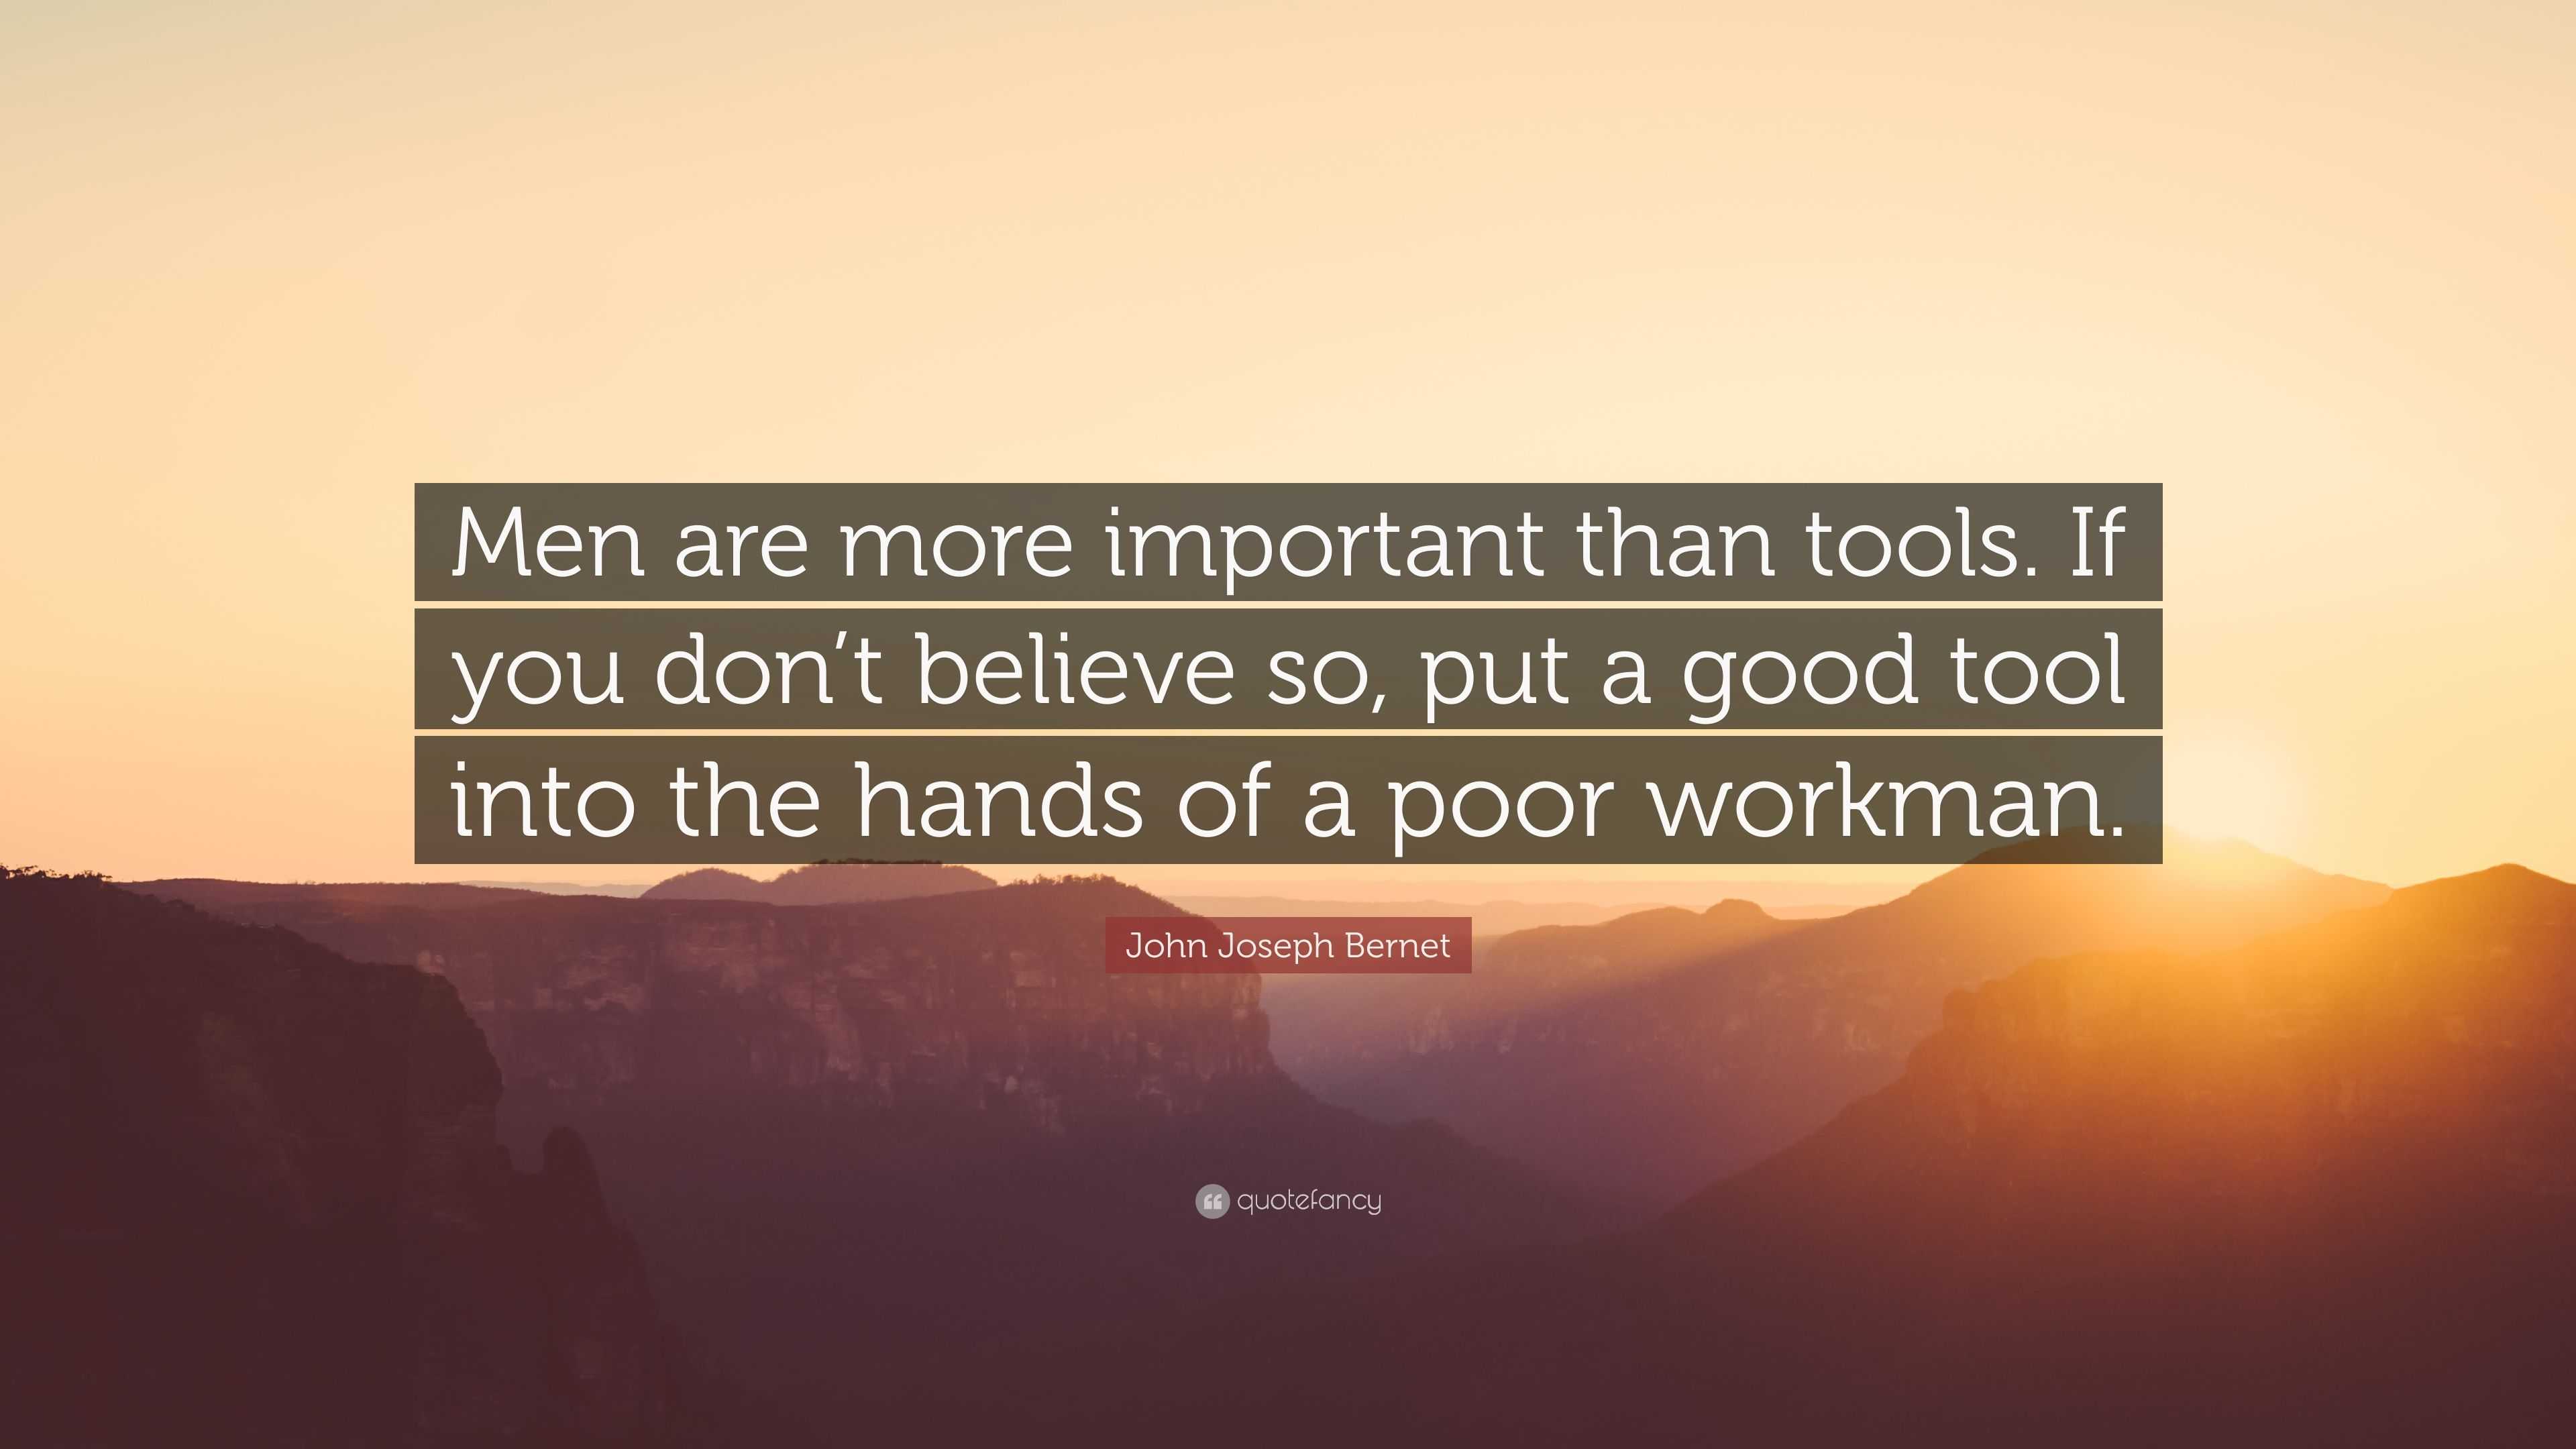 John Joseph Bernet Quote: “Men are more important than tools. If you